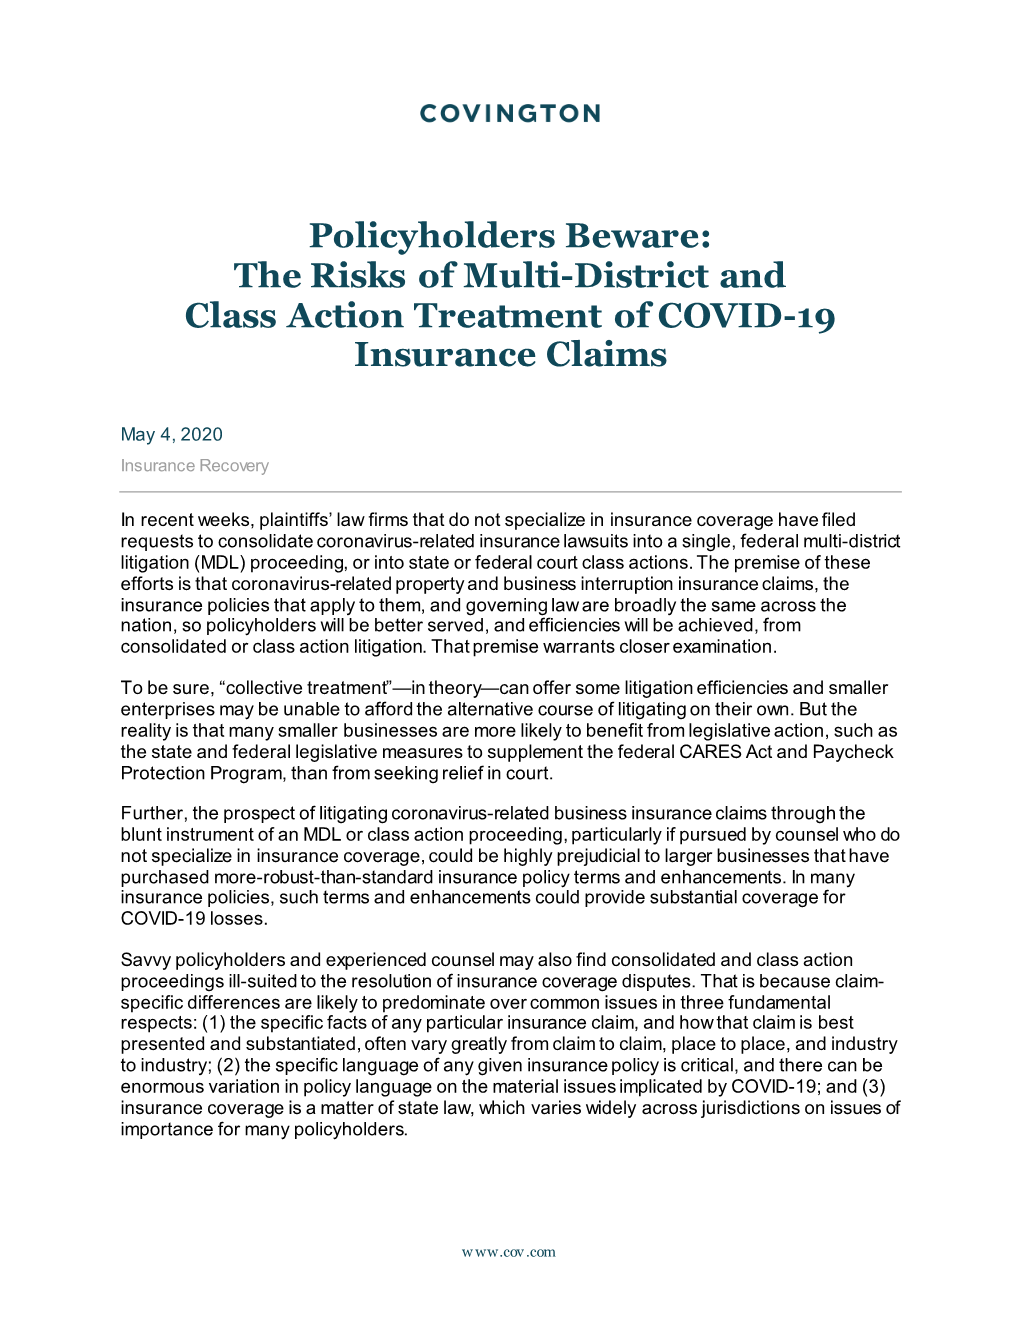 The Risks of Multi-District and Class Action Treatment of COVID-19 Insurance Claims